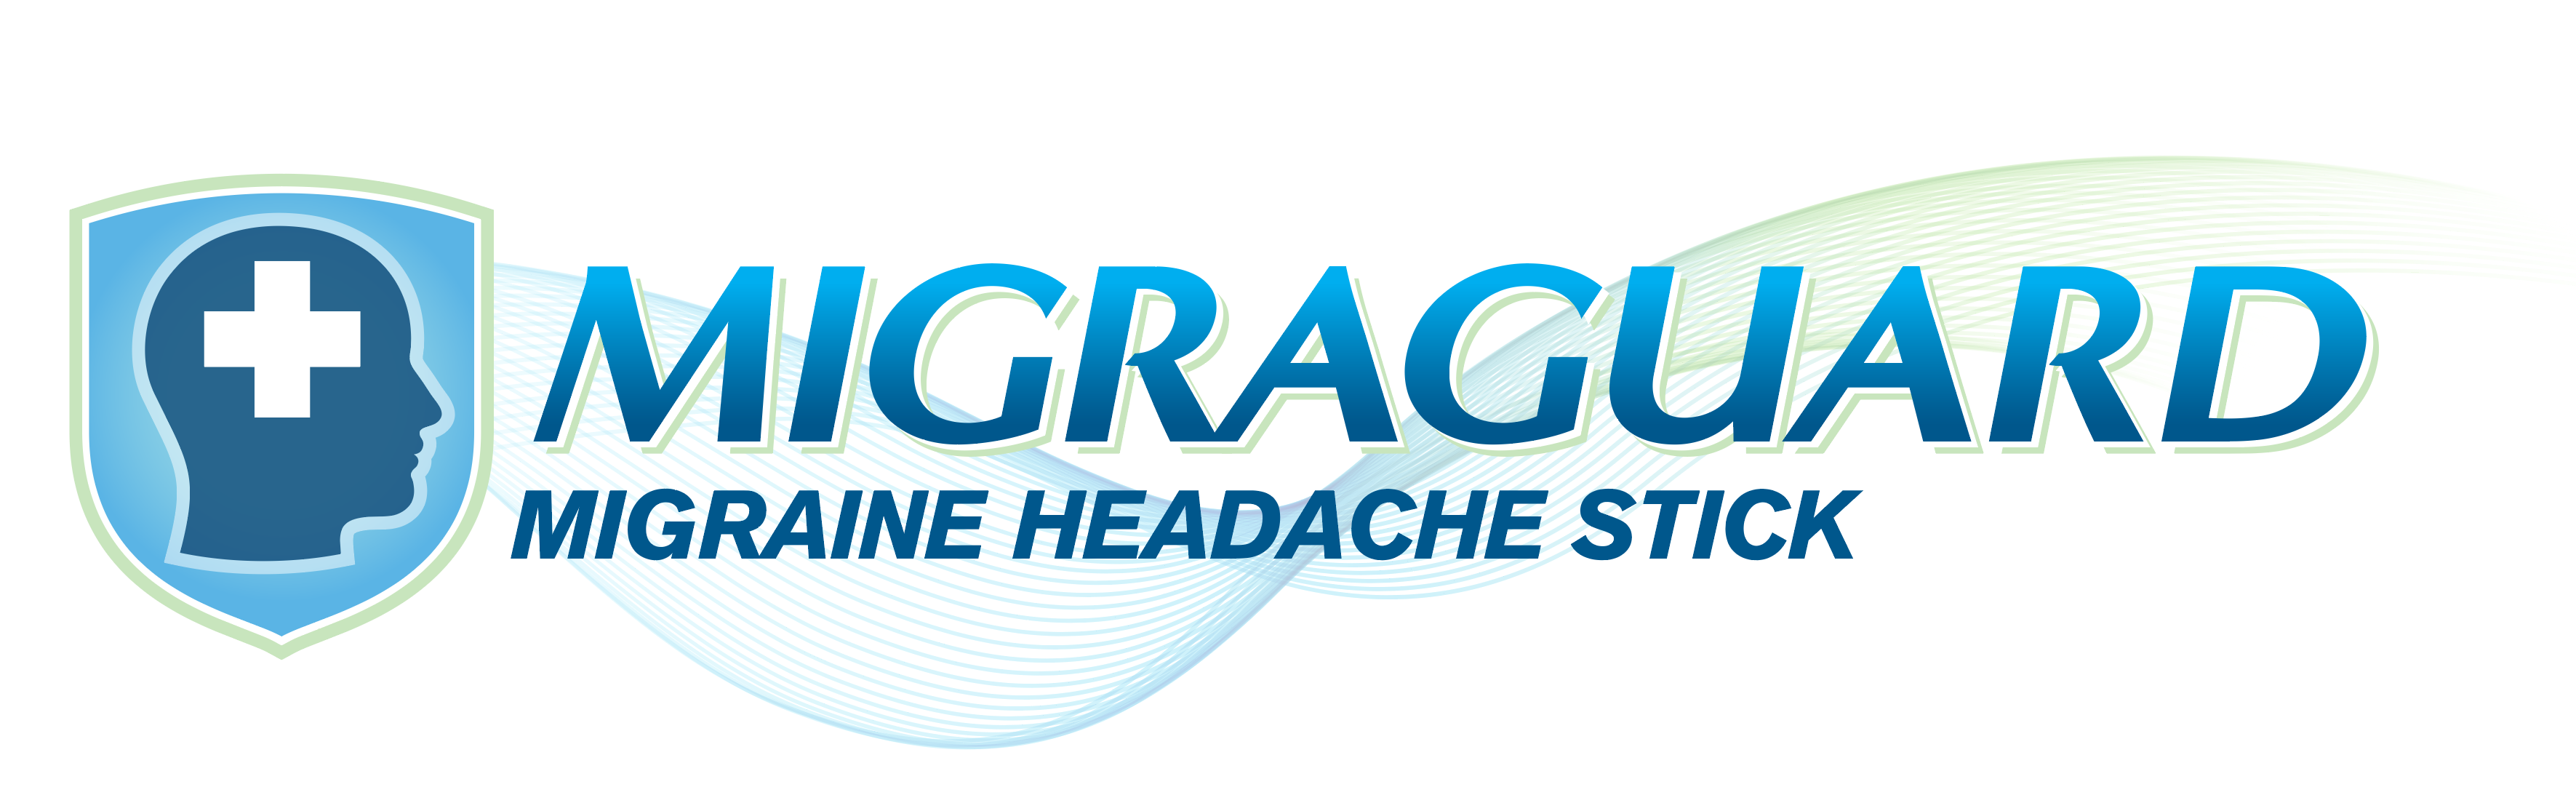 New Migraine Relief Product Provides Headache Sufferers with Alternative Treatment Option